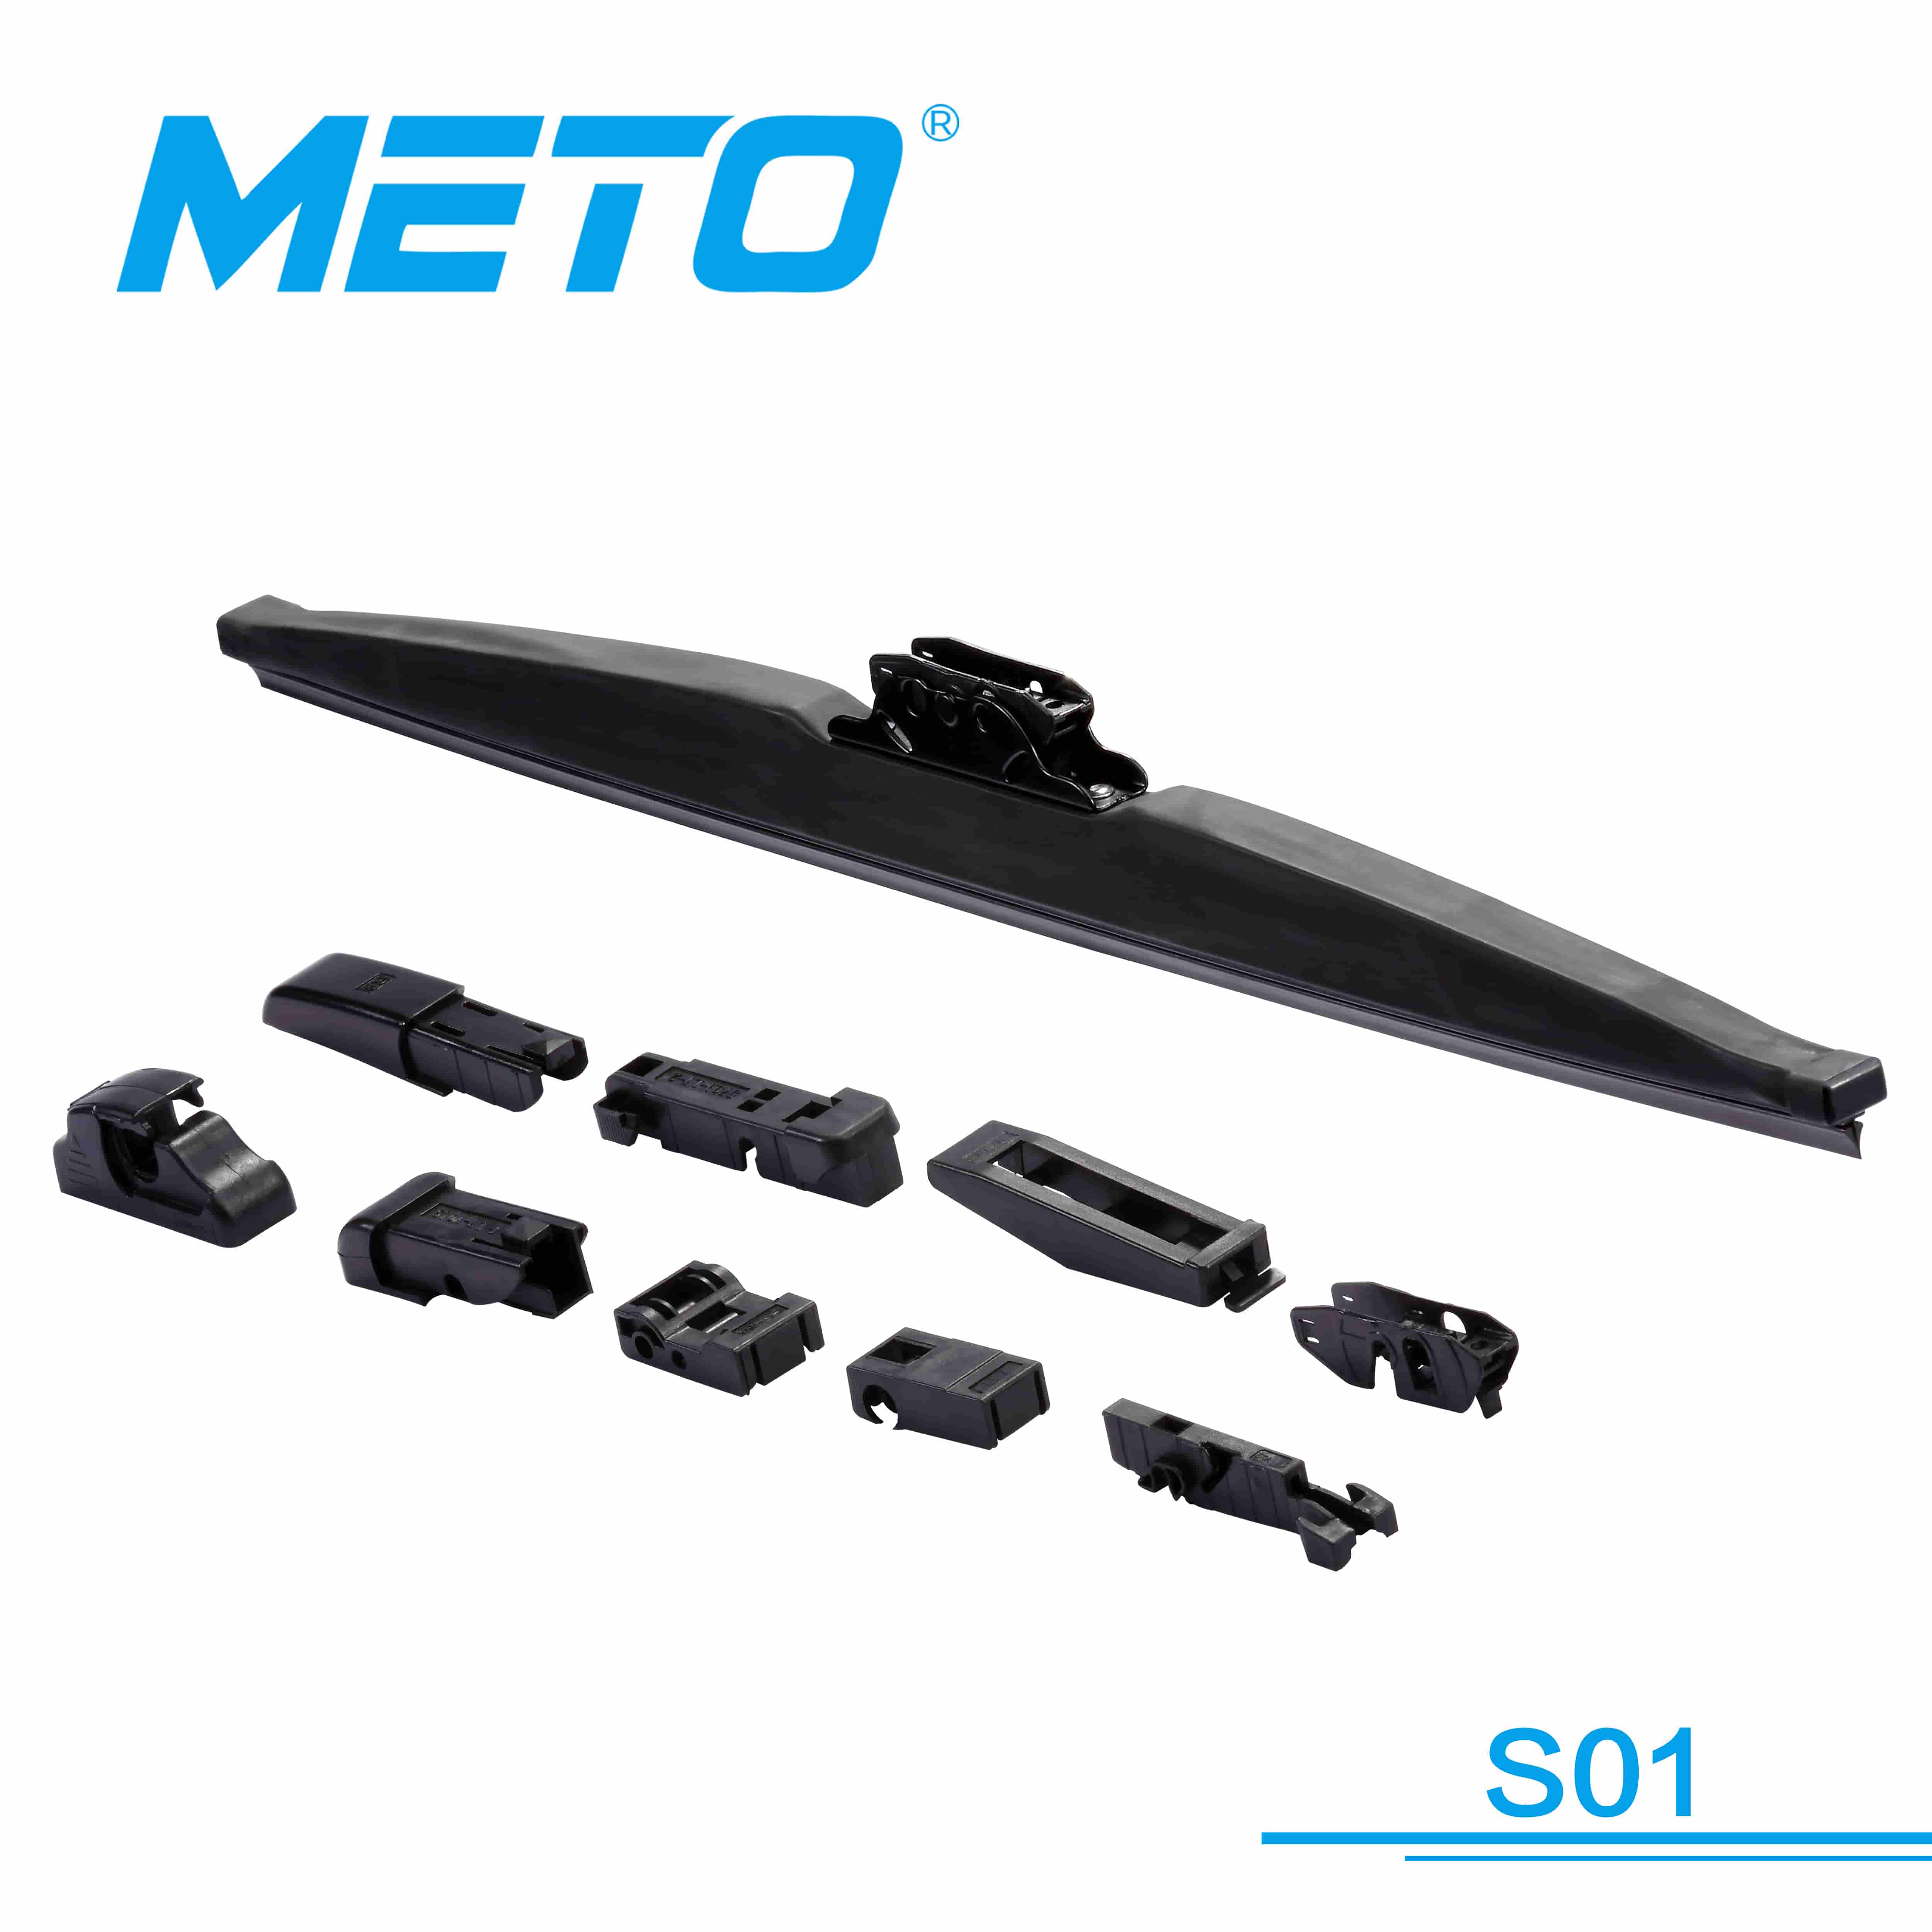 Multifunctional snow wiper blade fit for 99%